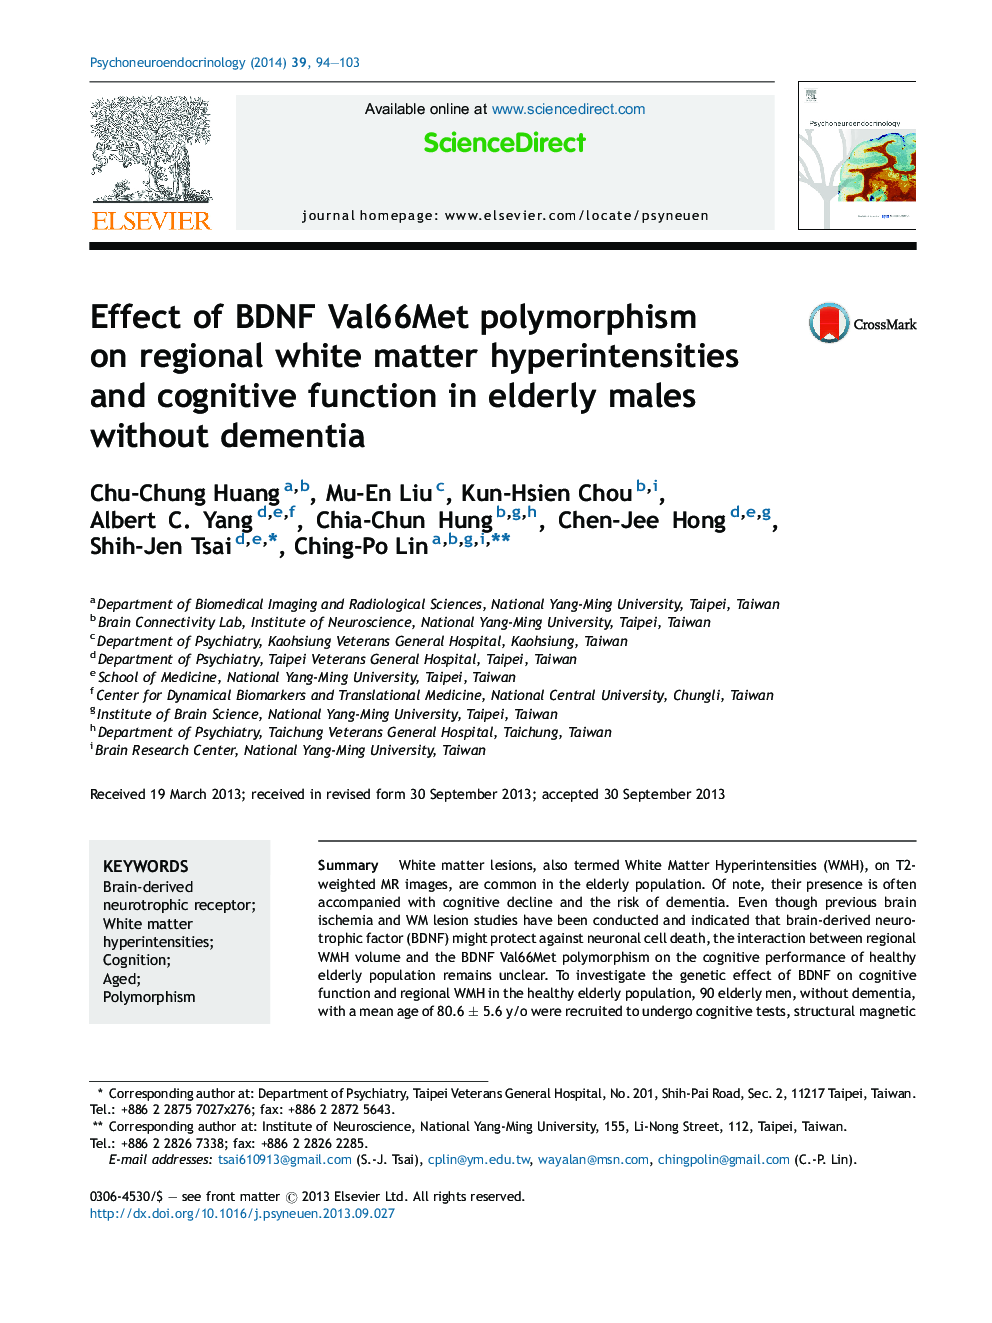 Effect of BDNF Val66Met polymorphism on regional white matter hyperintensities and cognitive function in elderly males without dementia